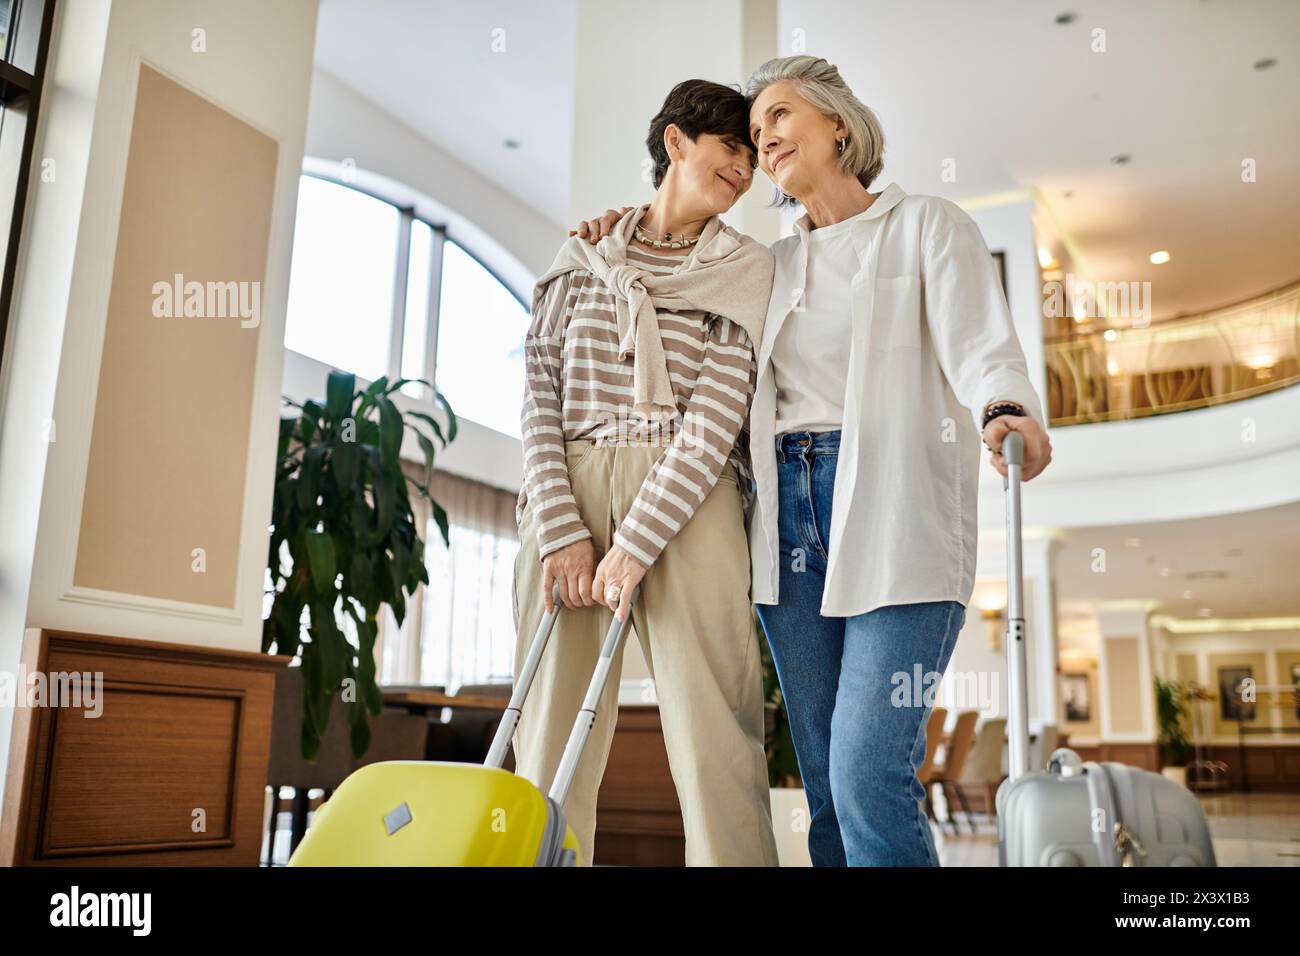 Senior lesbian couple, tenderly holding suitcases, ready for their journey. Stock Photo